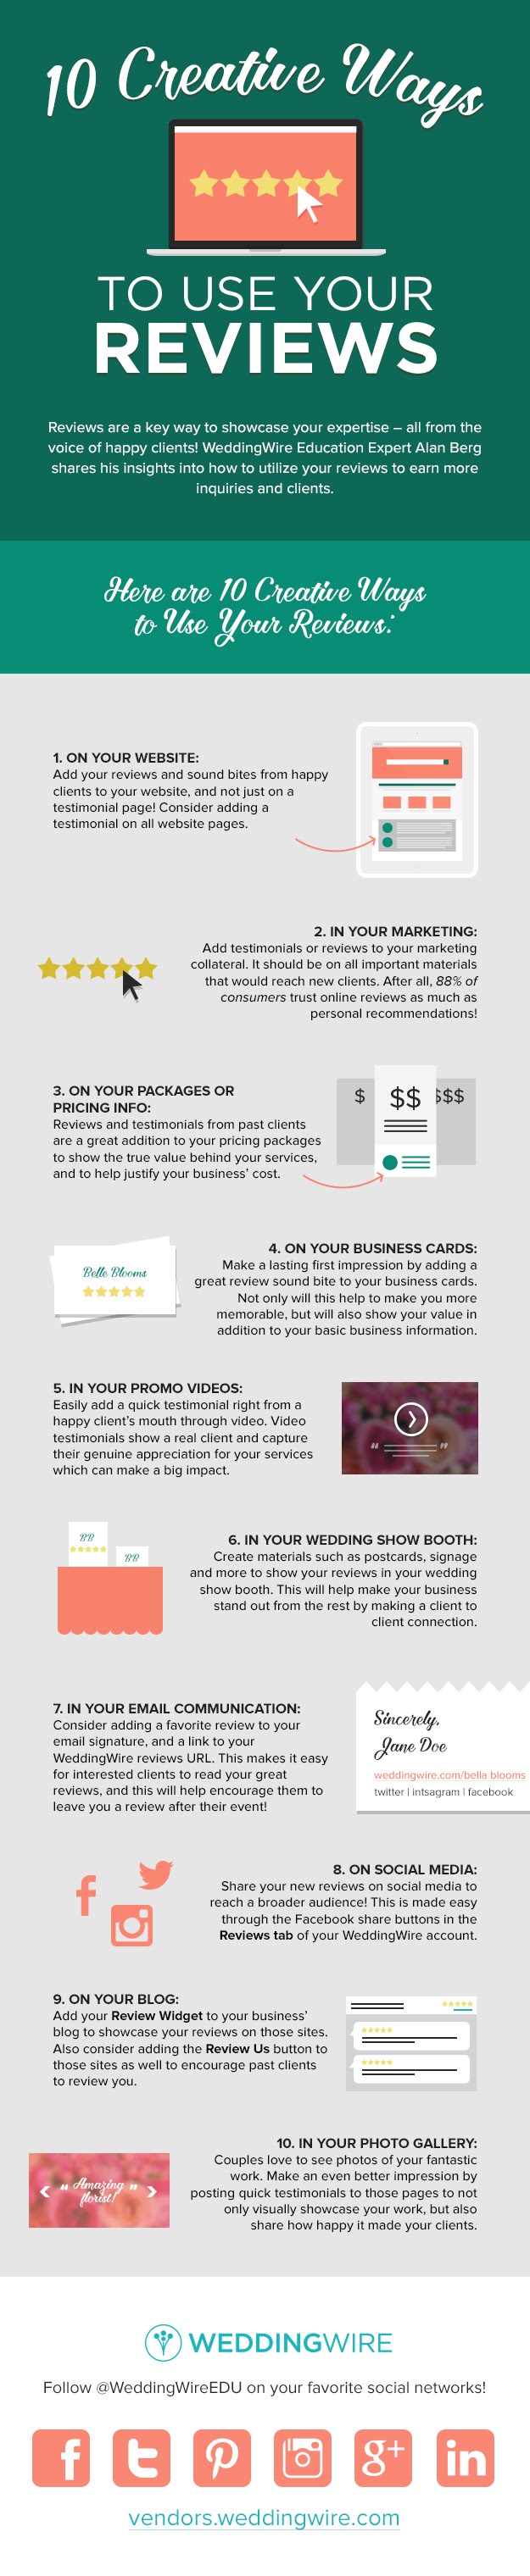 10 Creative Ways to Use Your Reviews - #infographic